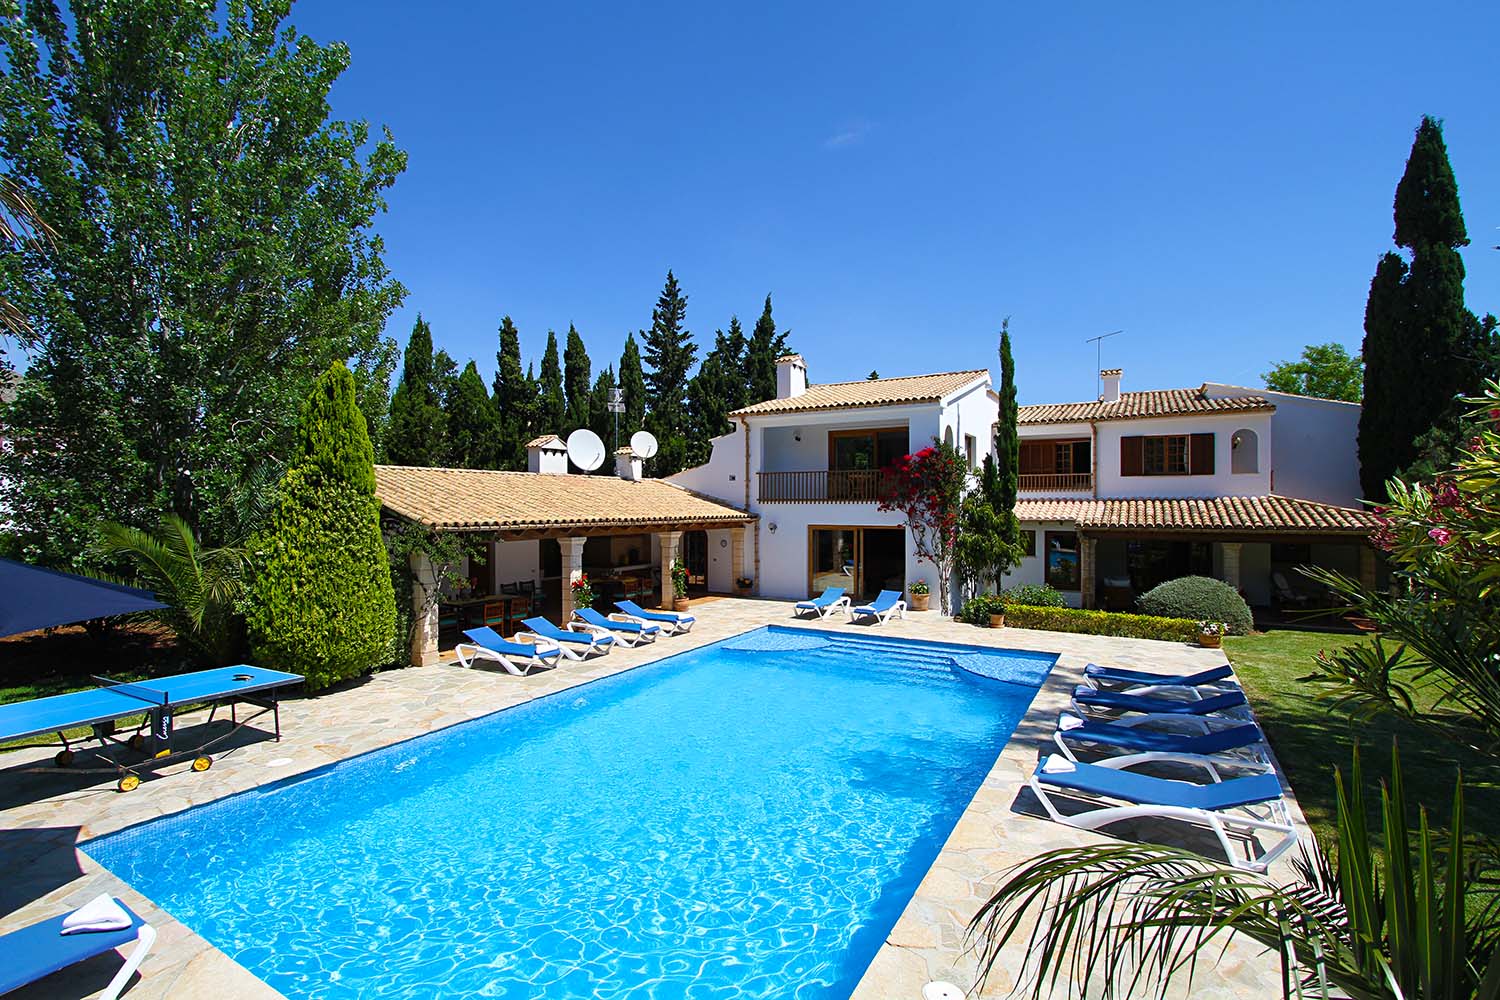 Can Toni is a spectacular 8 bedroom villa close to the beach in Puerto Pollensa